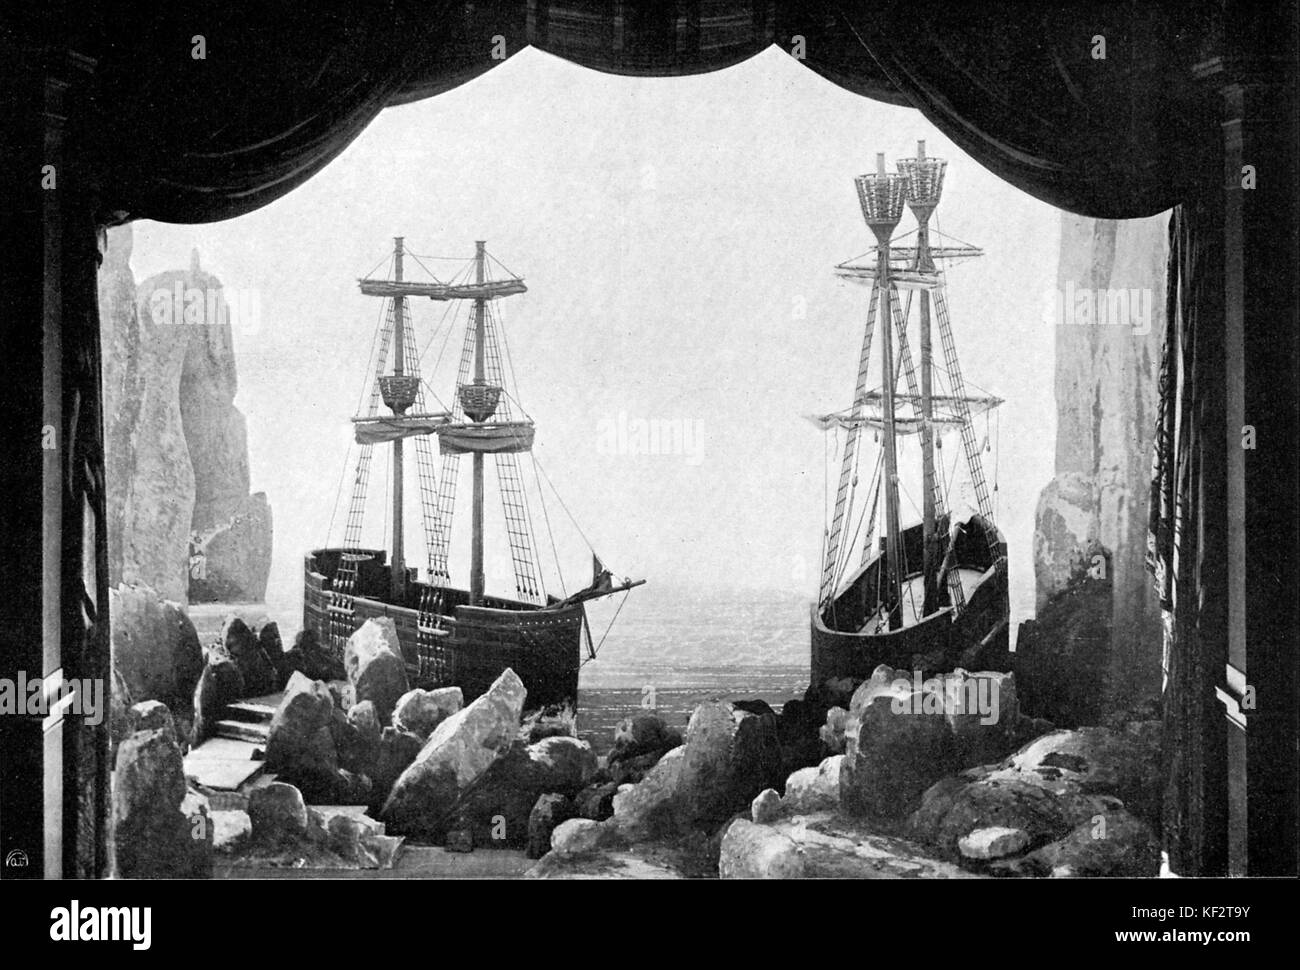 The Flying Dutchman by Richard Wagner [Der Fliegende Holländer]. Stage set for opera, Bayreuth, Germany. RW: German composer & author, 22 May 1813 - 13 February 1883. Stock Photo